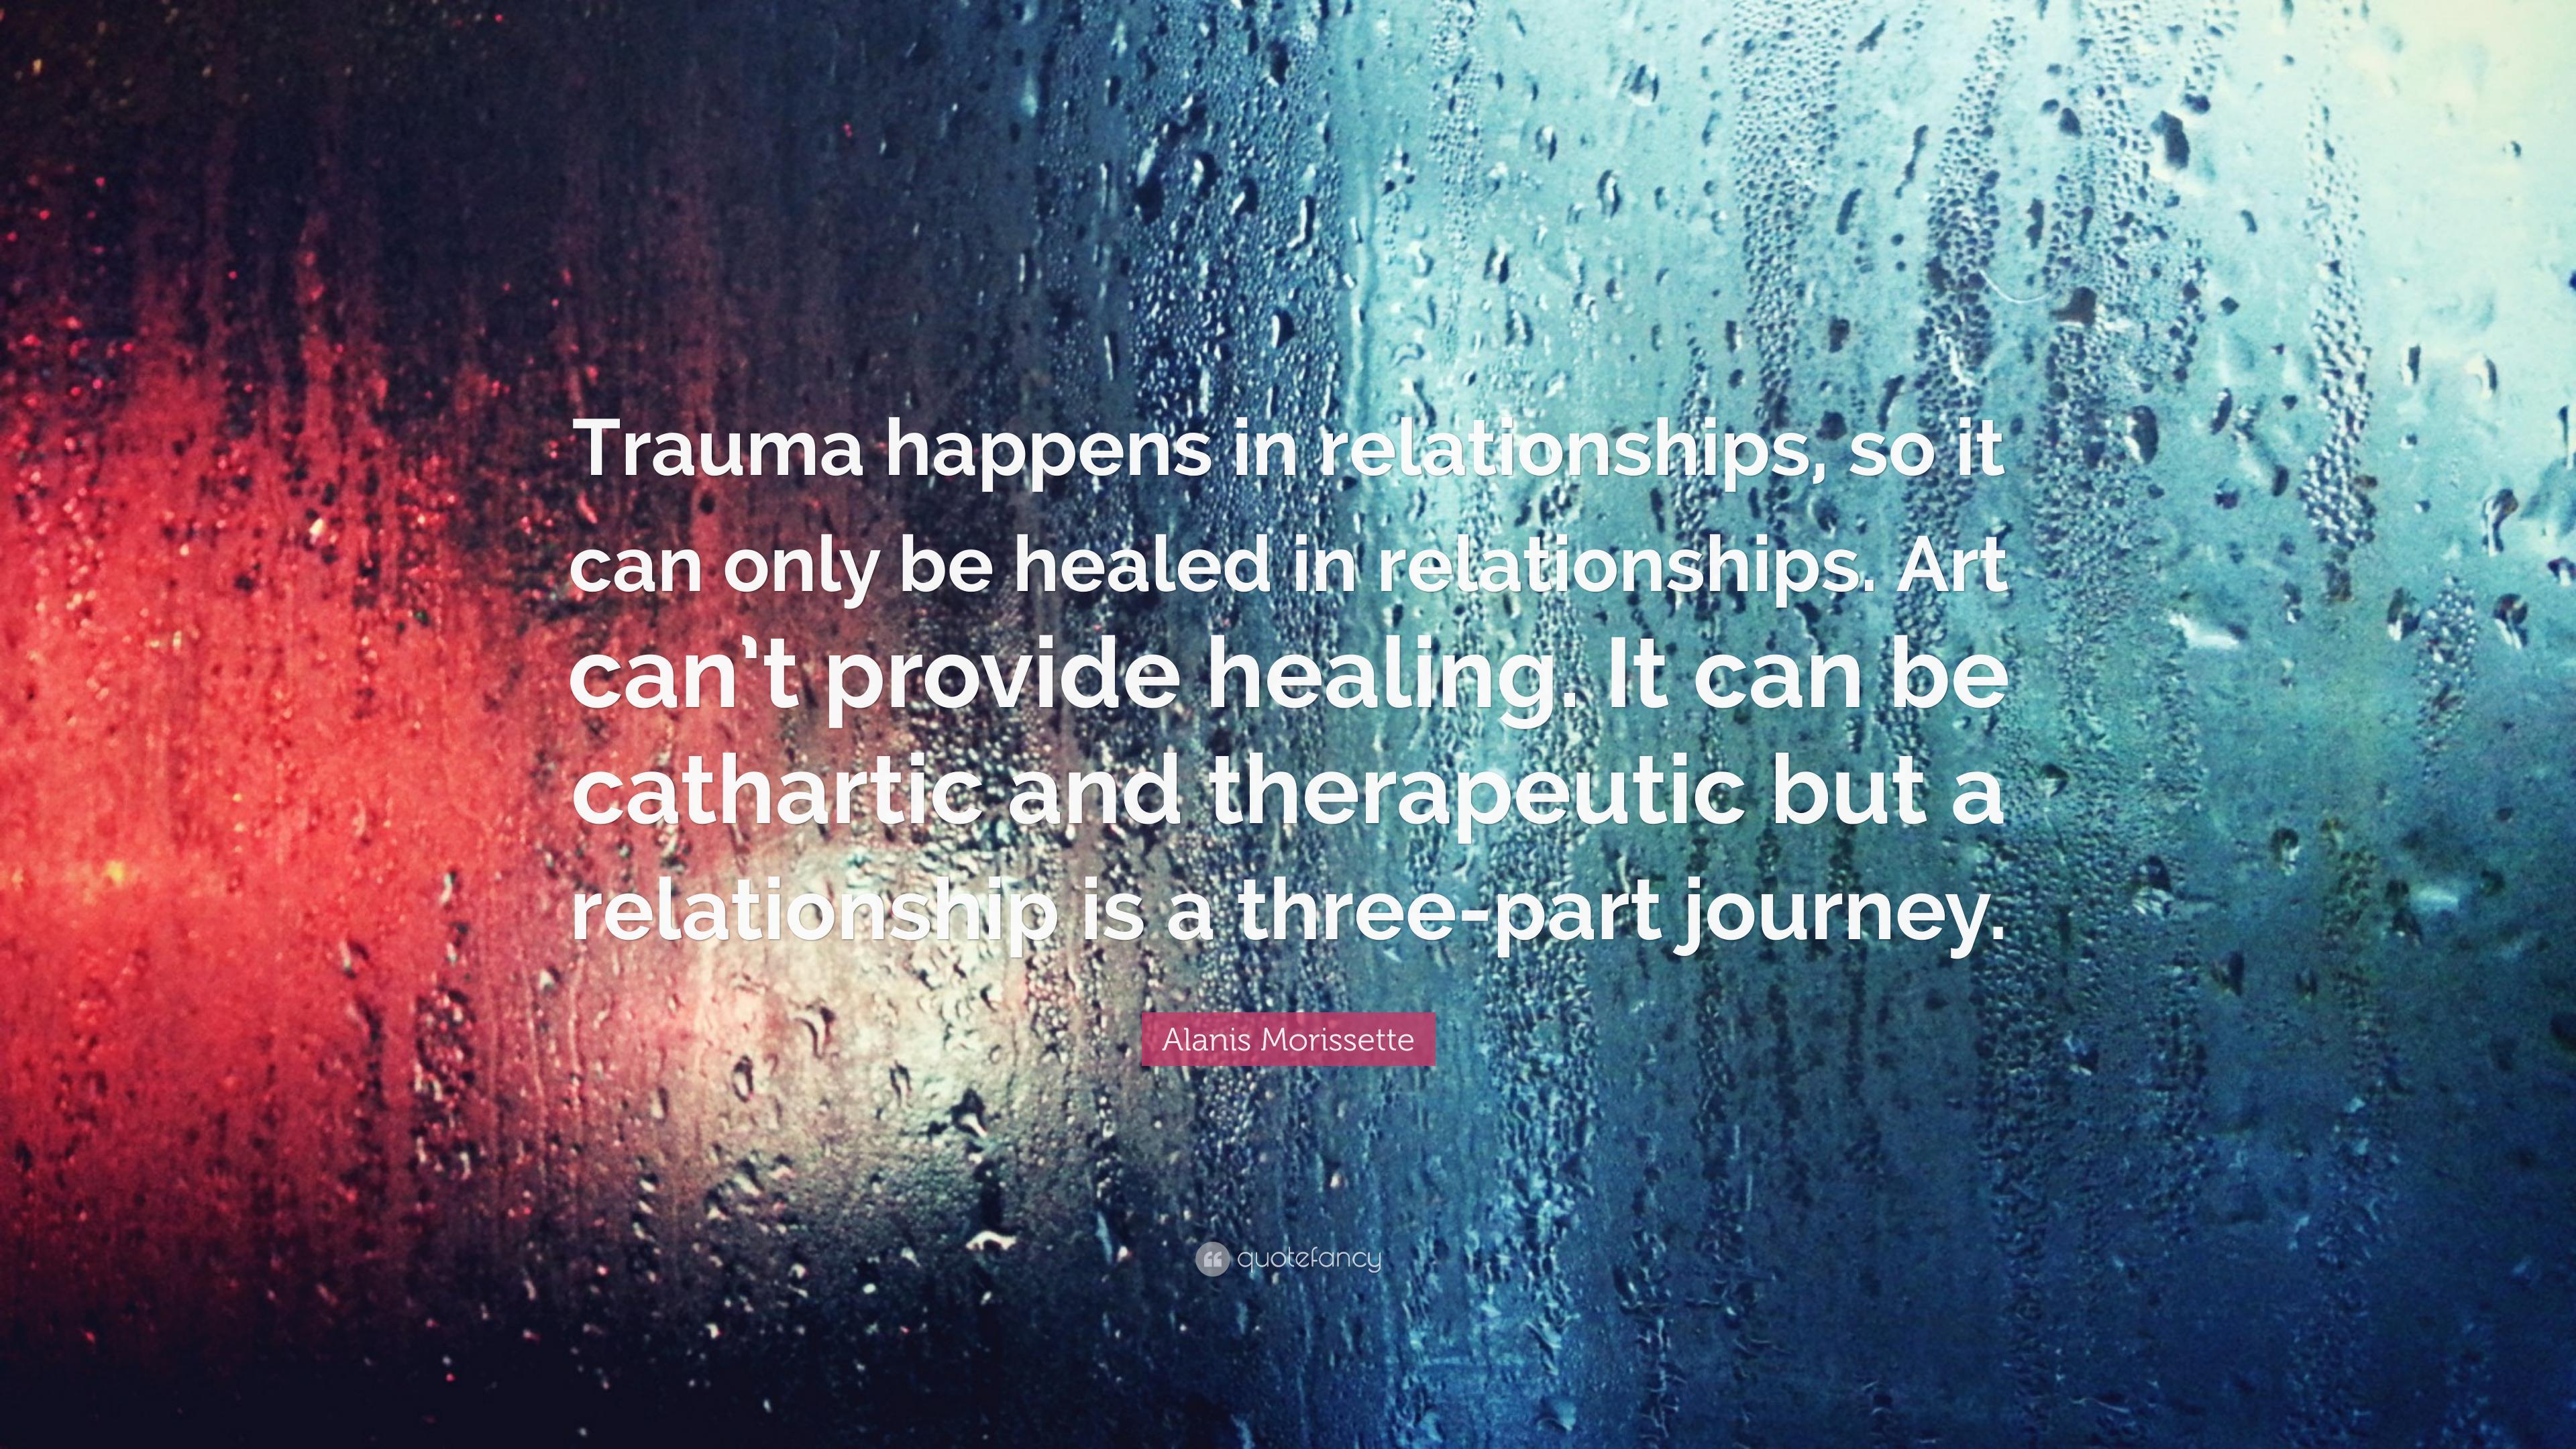 Alanis Morissette Quote: “Trauma happens in relationships, so it can